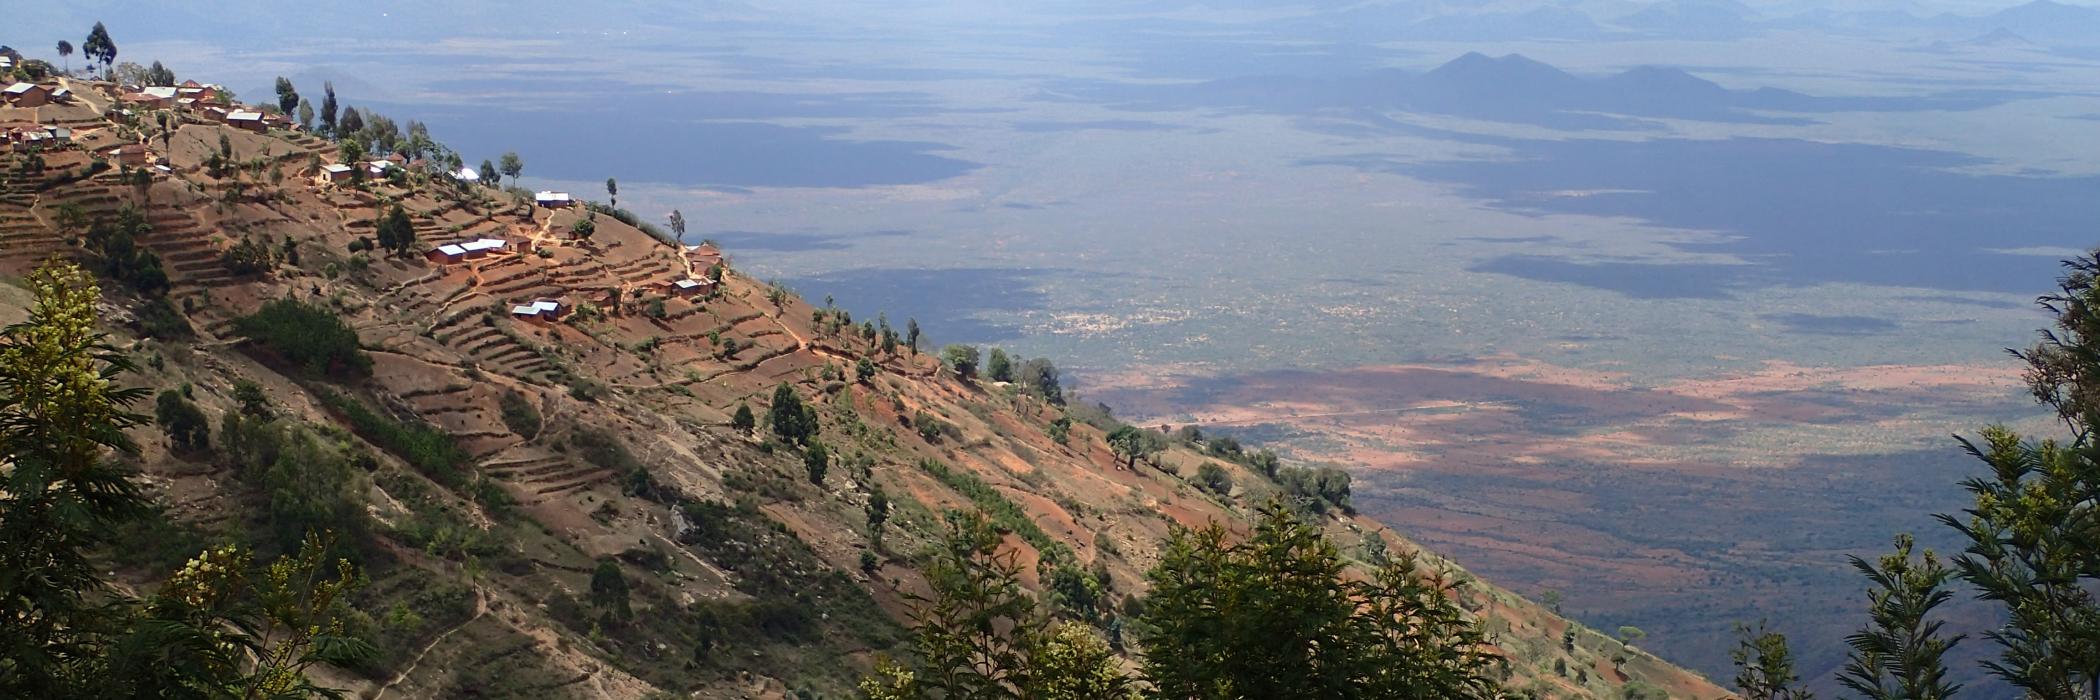 Sustainable land management in the Lushoto research area in Tanzania, where terrace cultivation prevents severe soil erosion on the steep slopes.